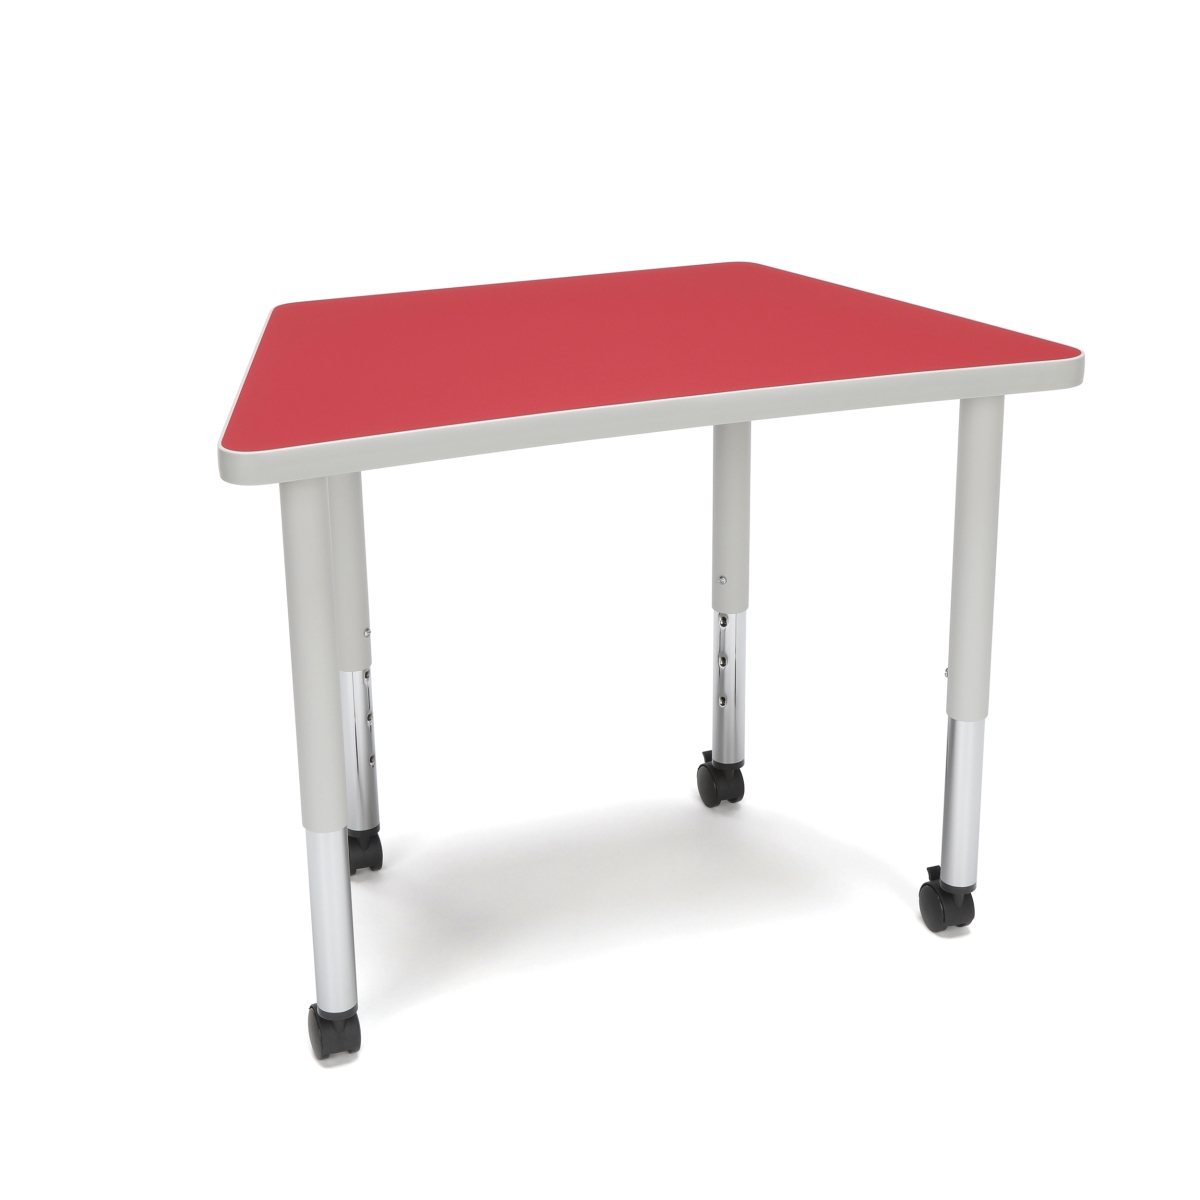 Trap-slc-red Adapt Series Trapezoid Student Table - 20-28 In. Height Adjustable Desk With Casters, Red